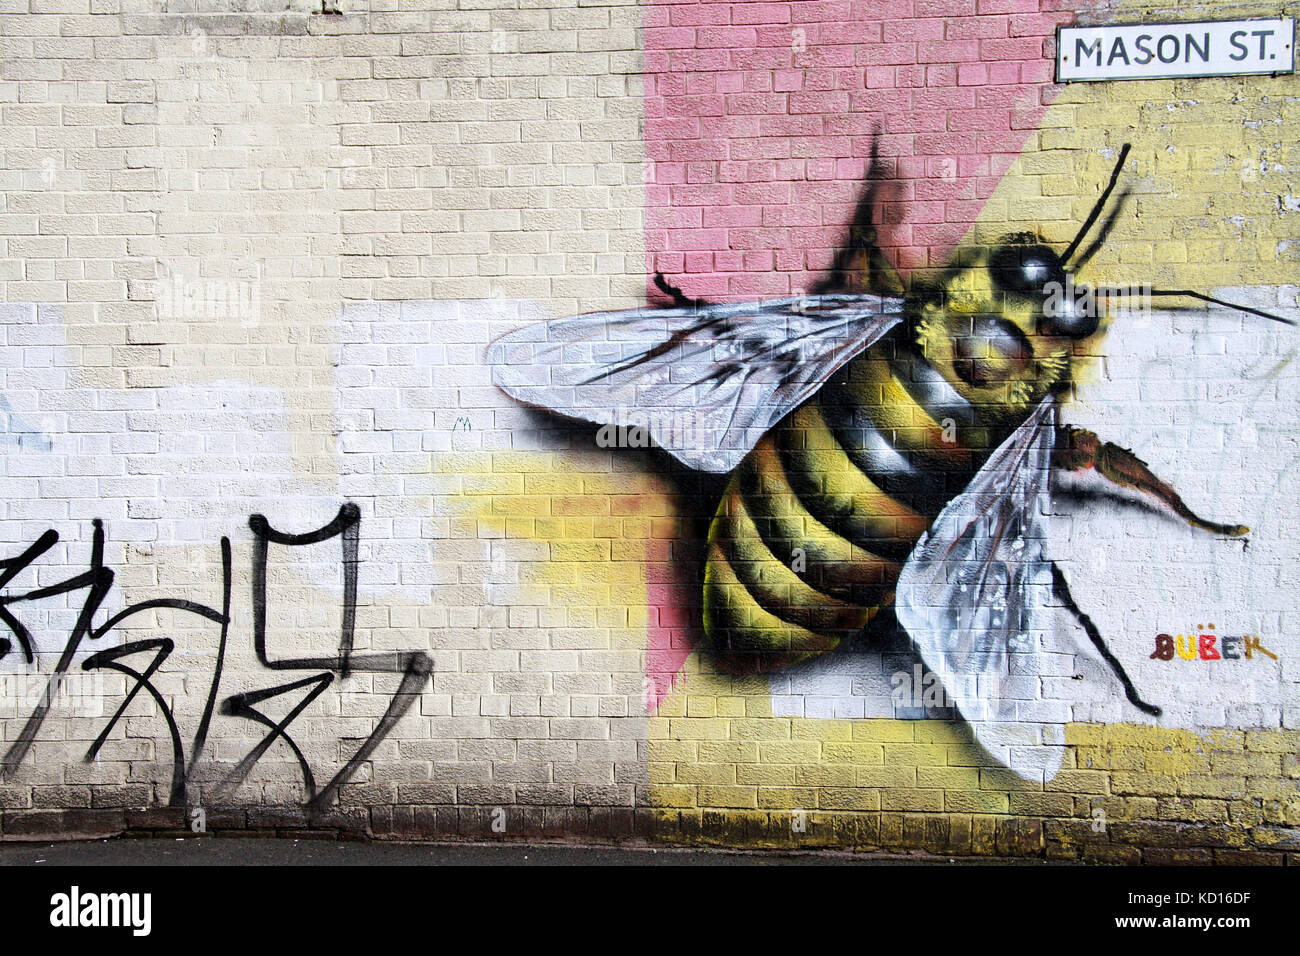 Mason Street with symbolic worker bee street art in the Northern Quarter of Manchester Stock Photo